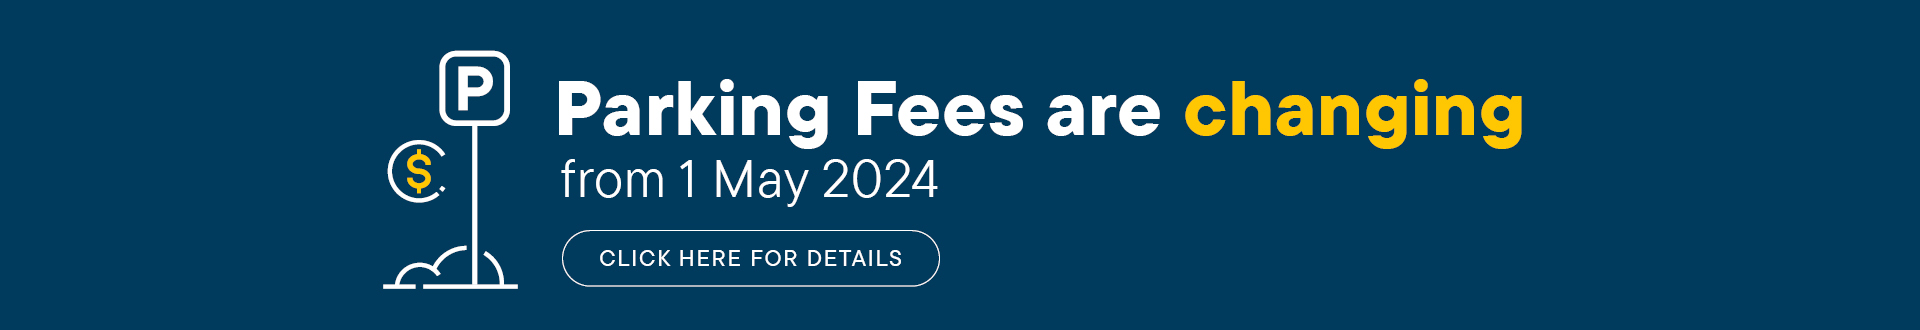 Parking fee changes 1 May 2024